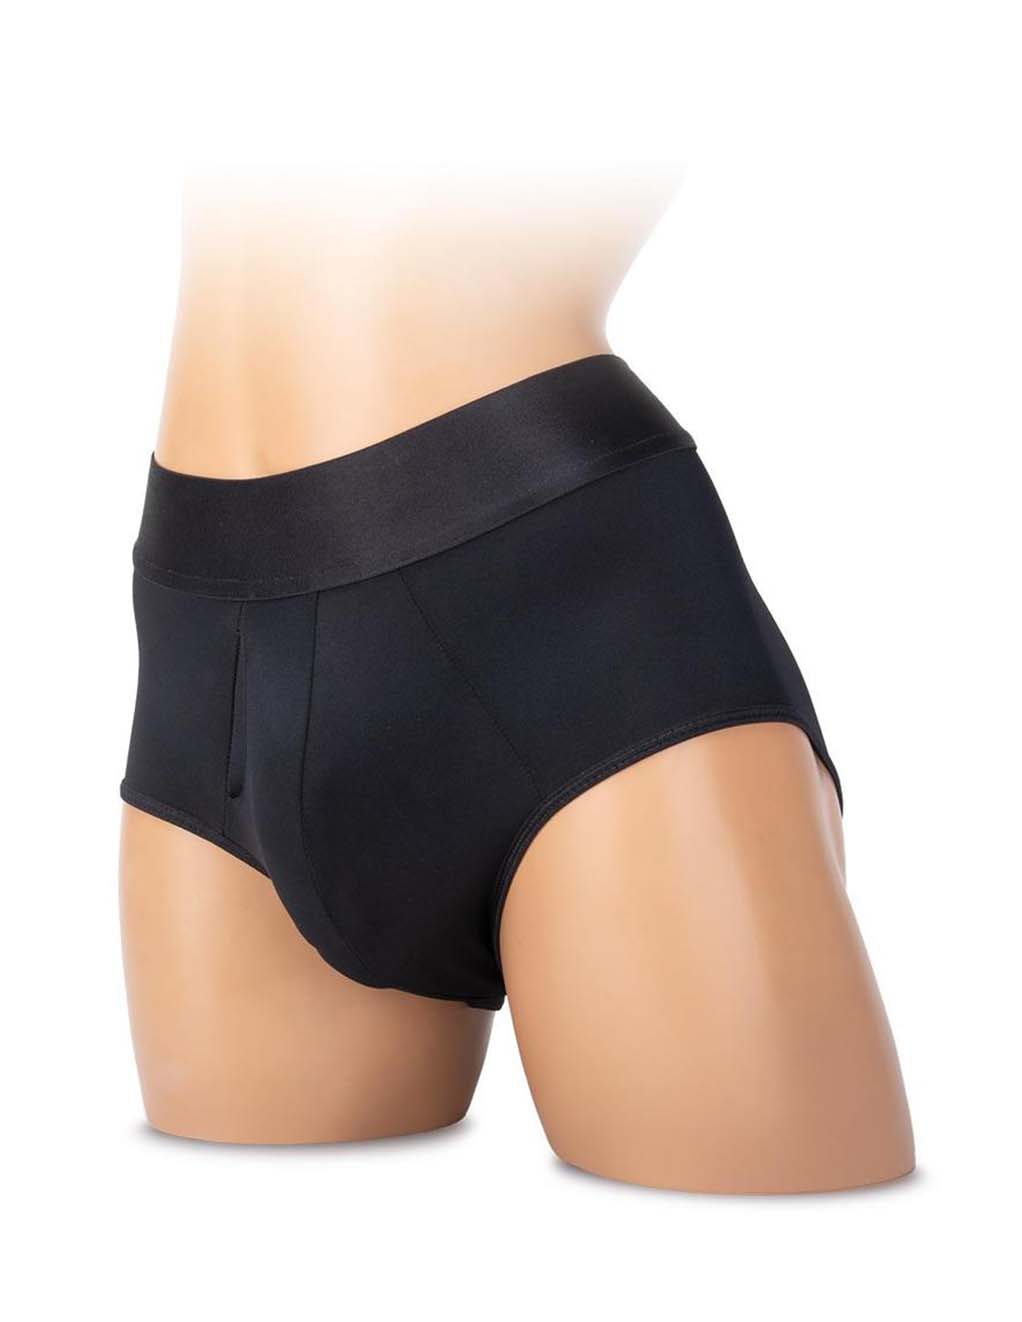 WhipSmart Soft Packing Brief- Main